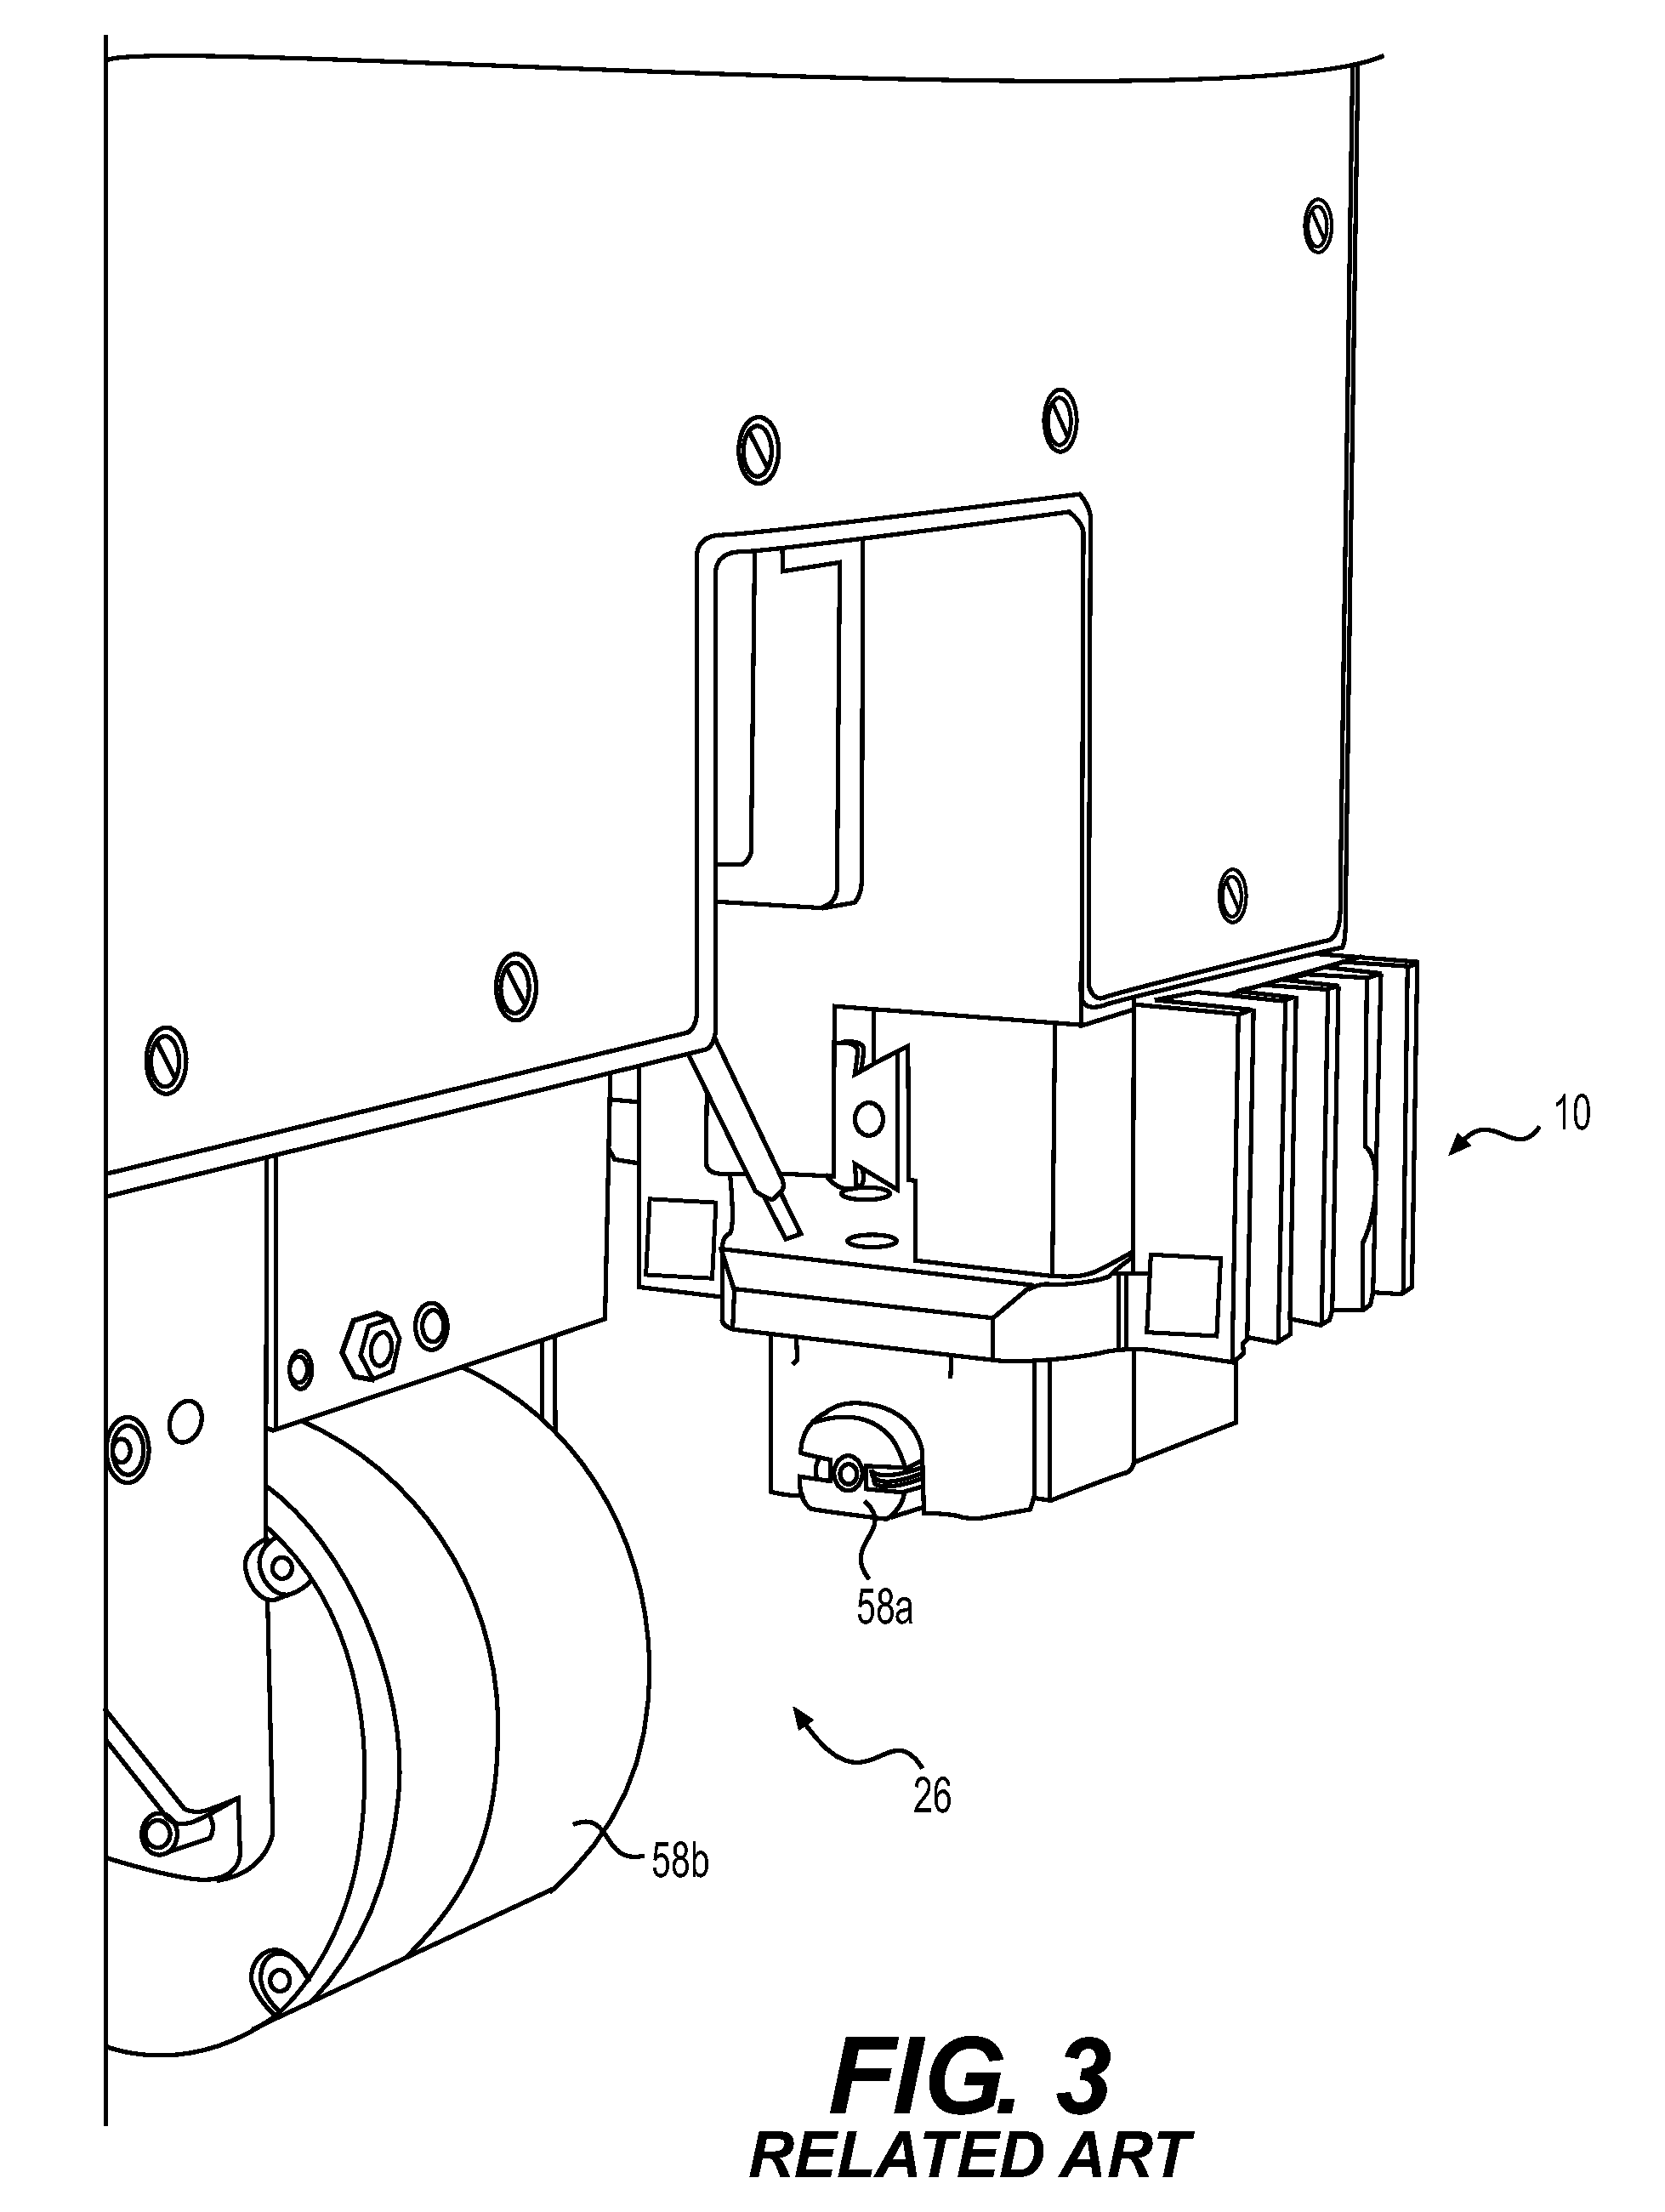 Method and apparatus for increased purge efficacy in optical absorption spectroscopic measurements of gases in sealed containers